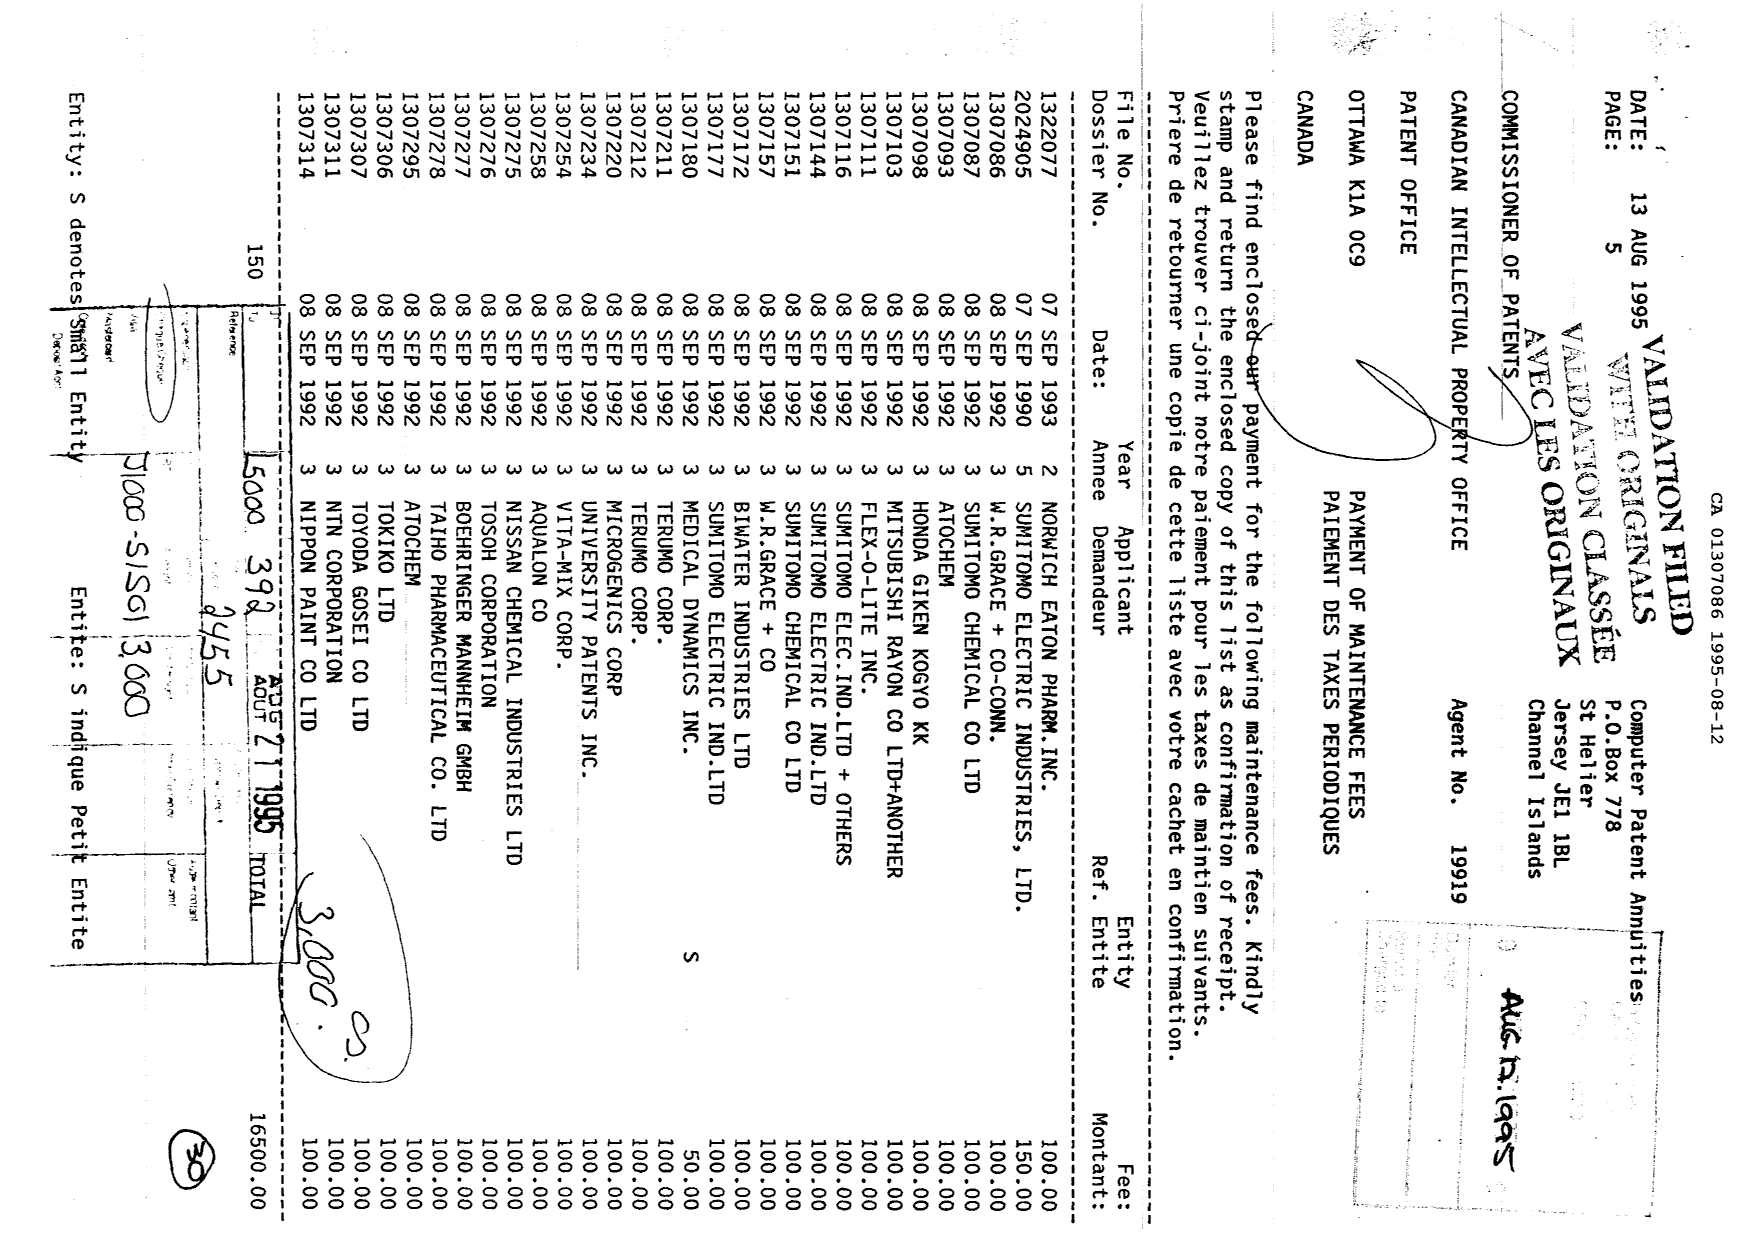 Canadian Patent Document 1307086. Fees 19950812. Image 1 of 1